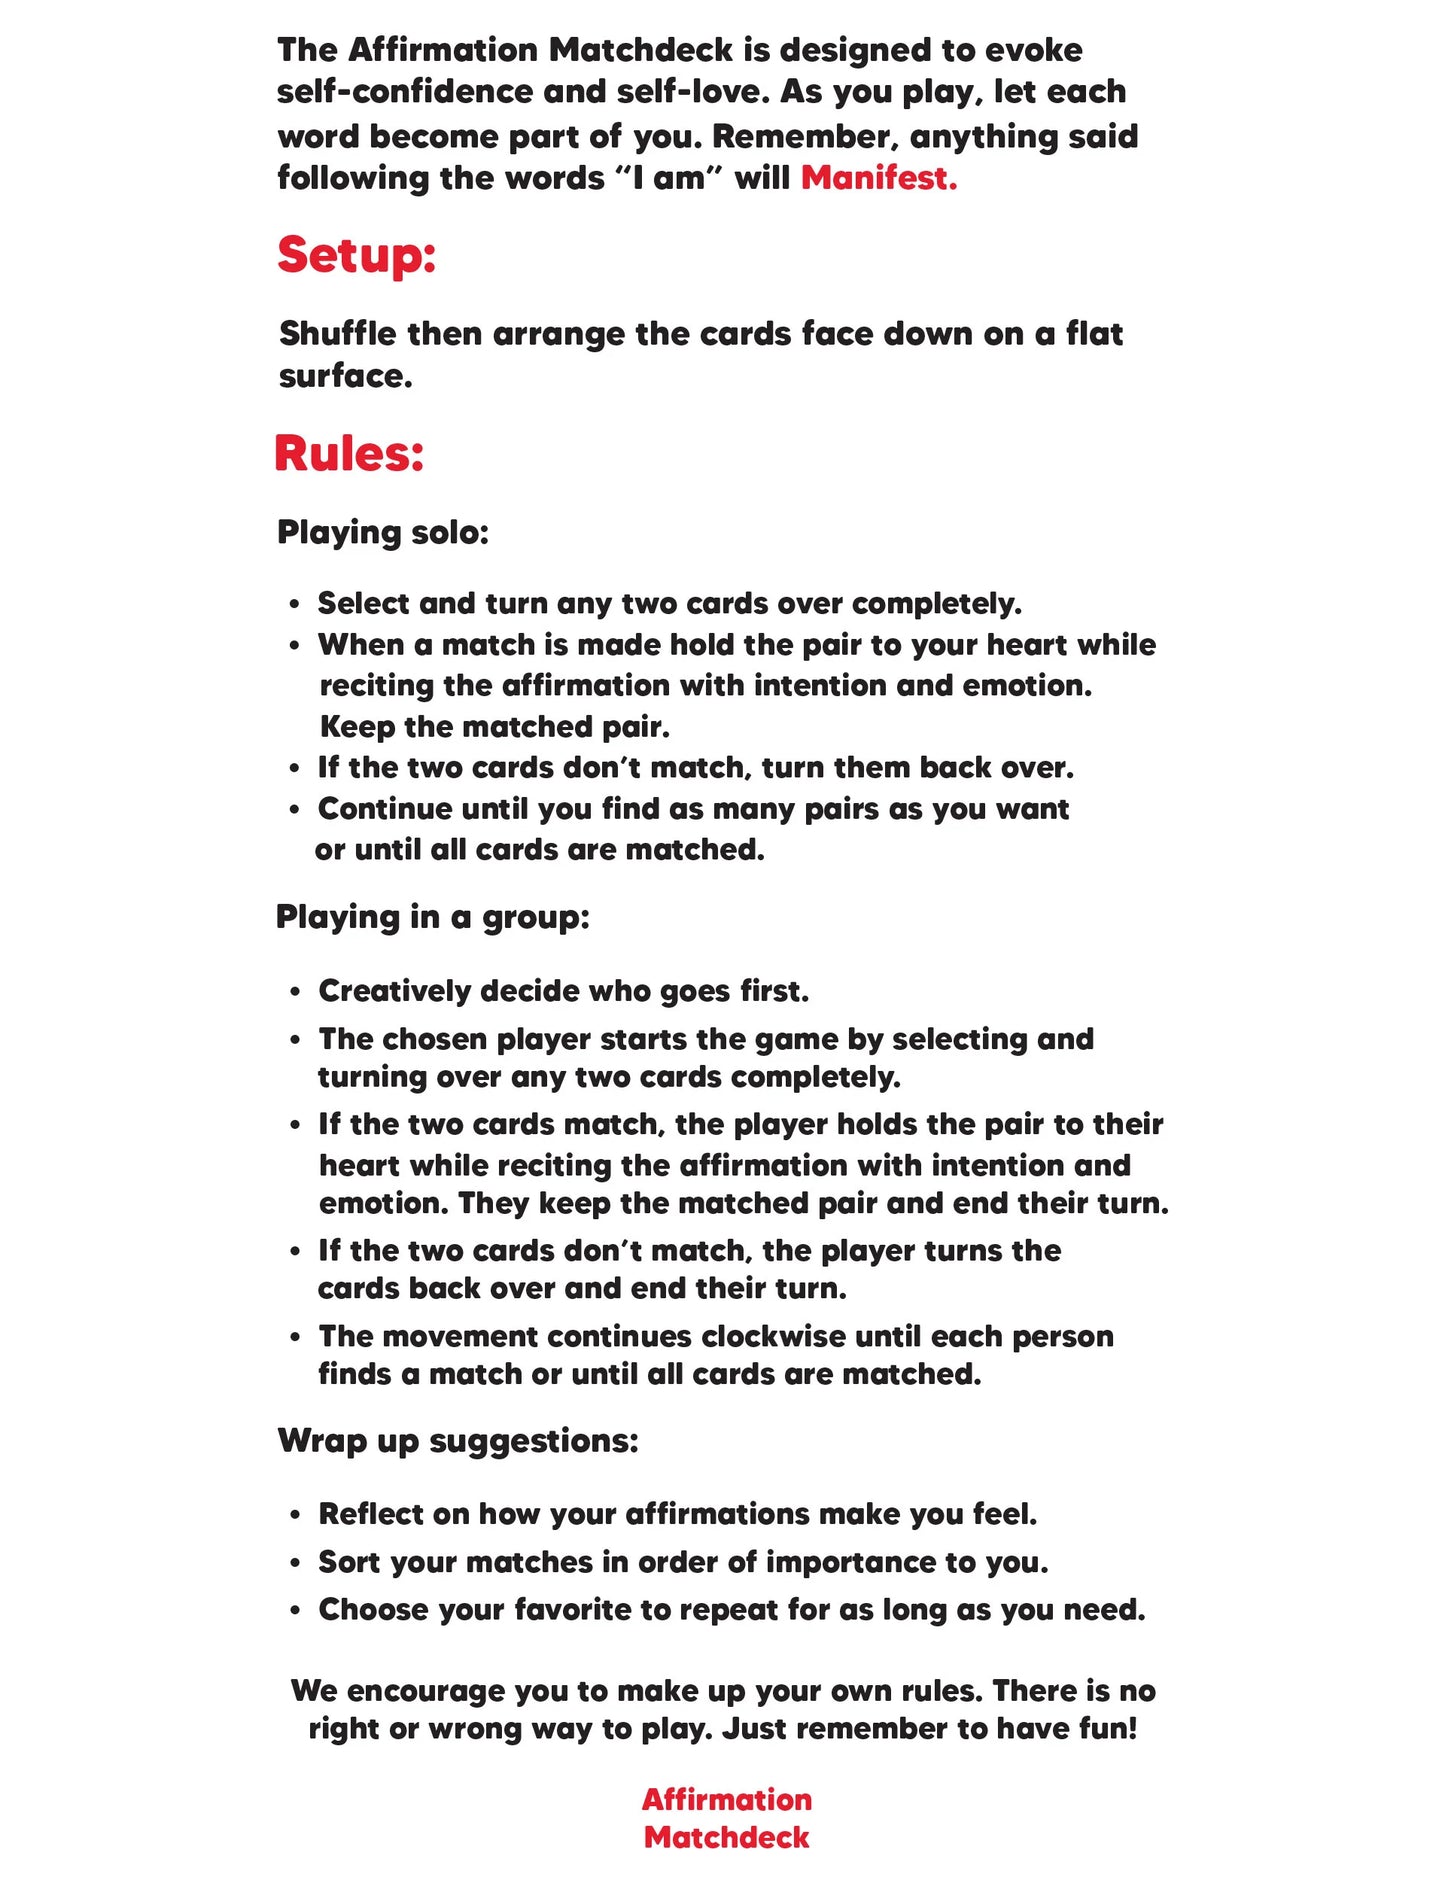 Affirmation Matchdeck rule page with game guidelines